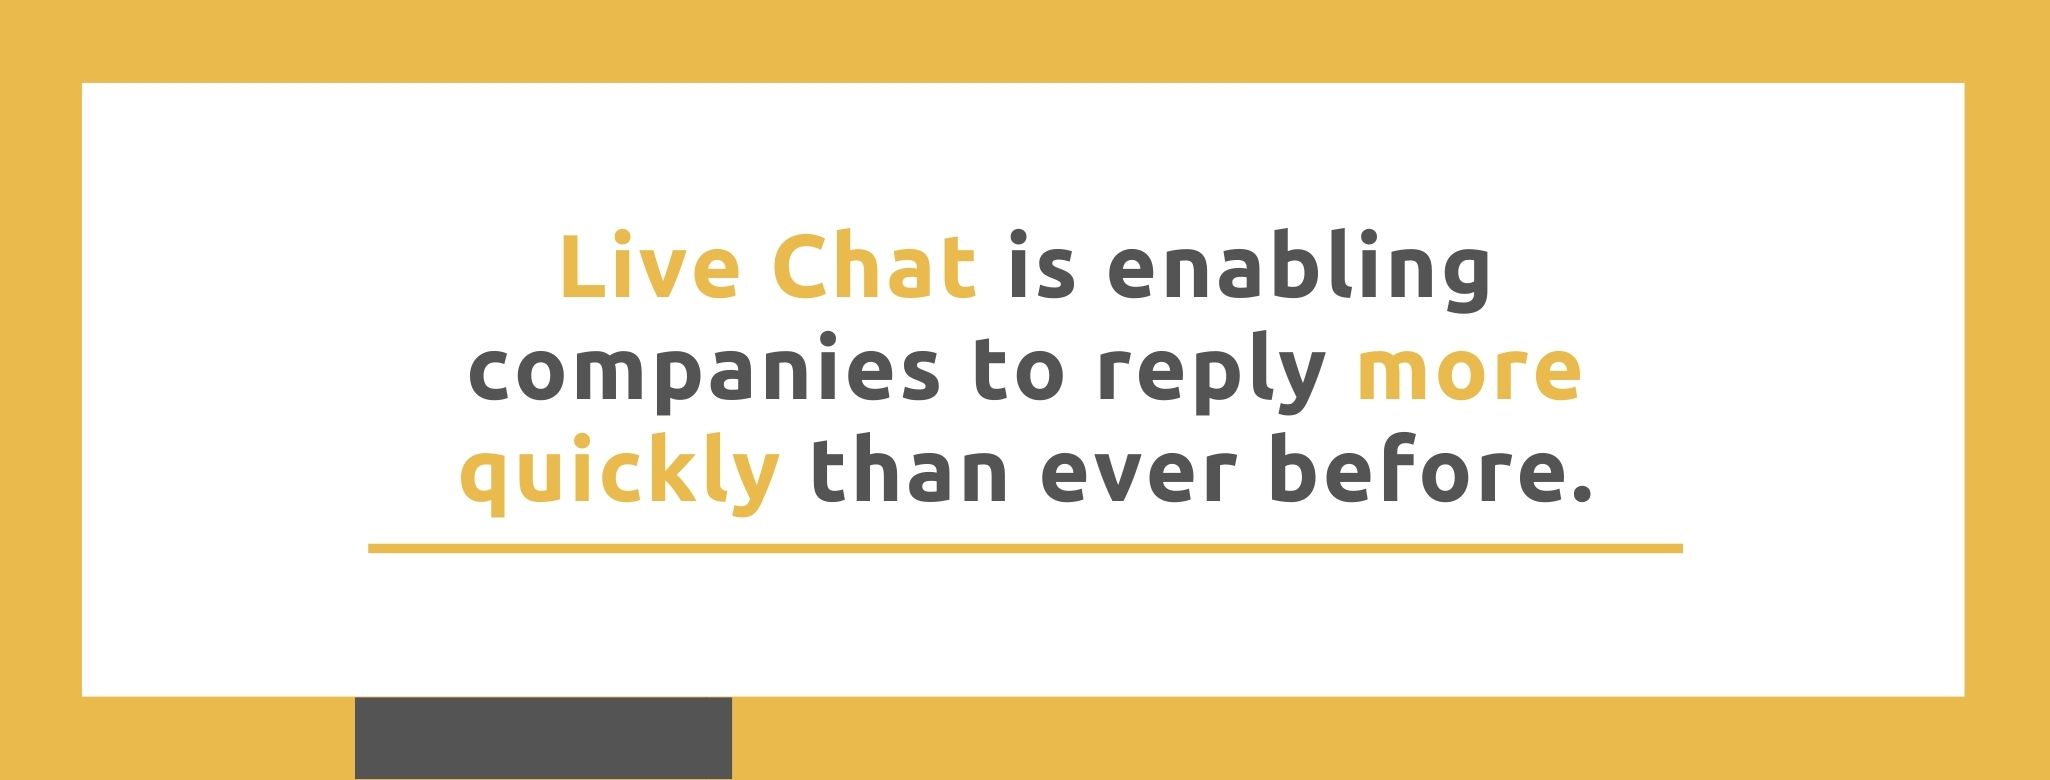 Live Chat is enabling companies to reply more quickly than ever before. - 22 Live Chat Statistics - Replyco